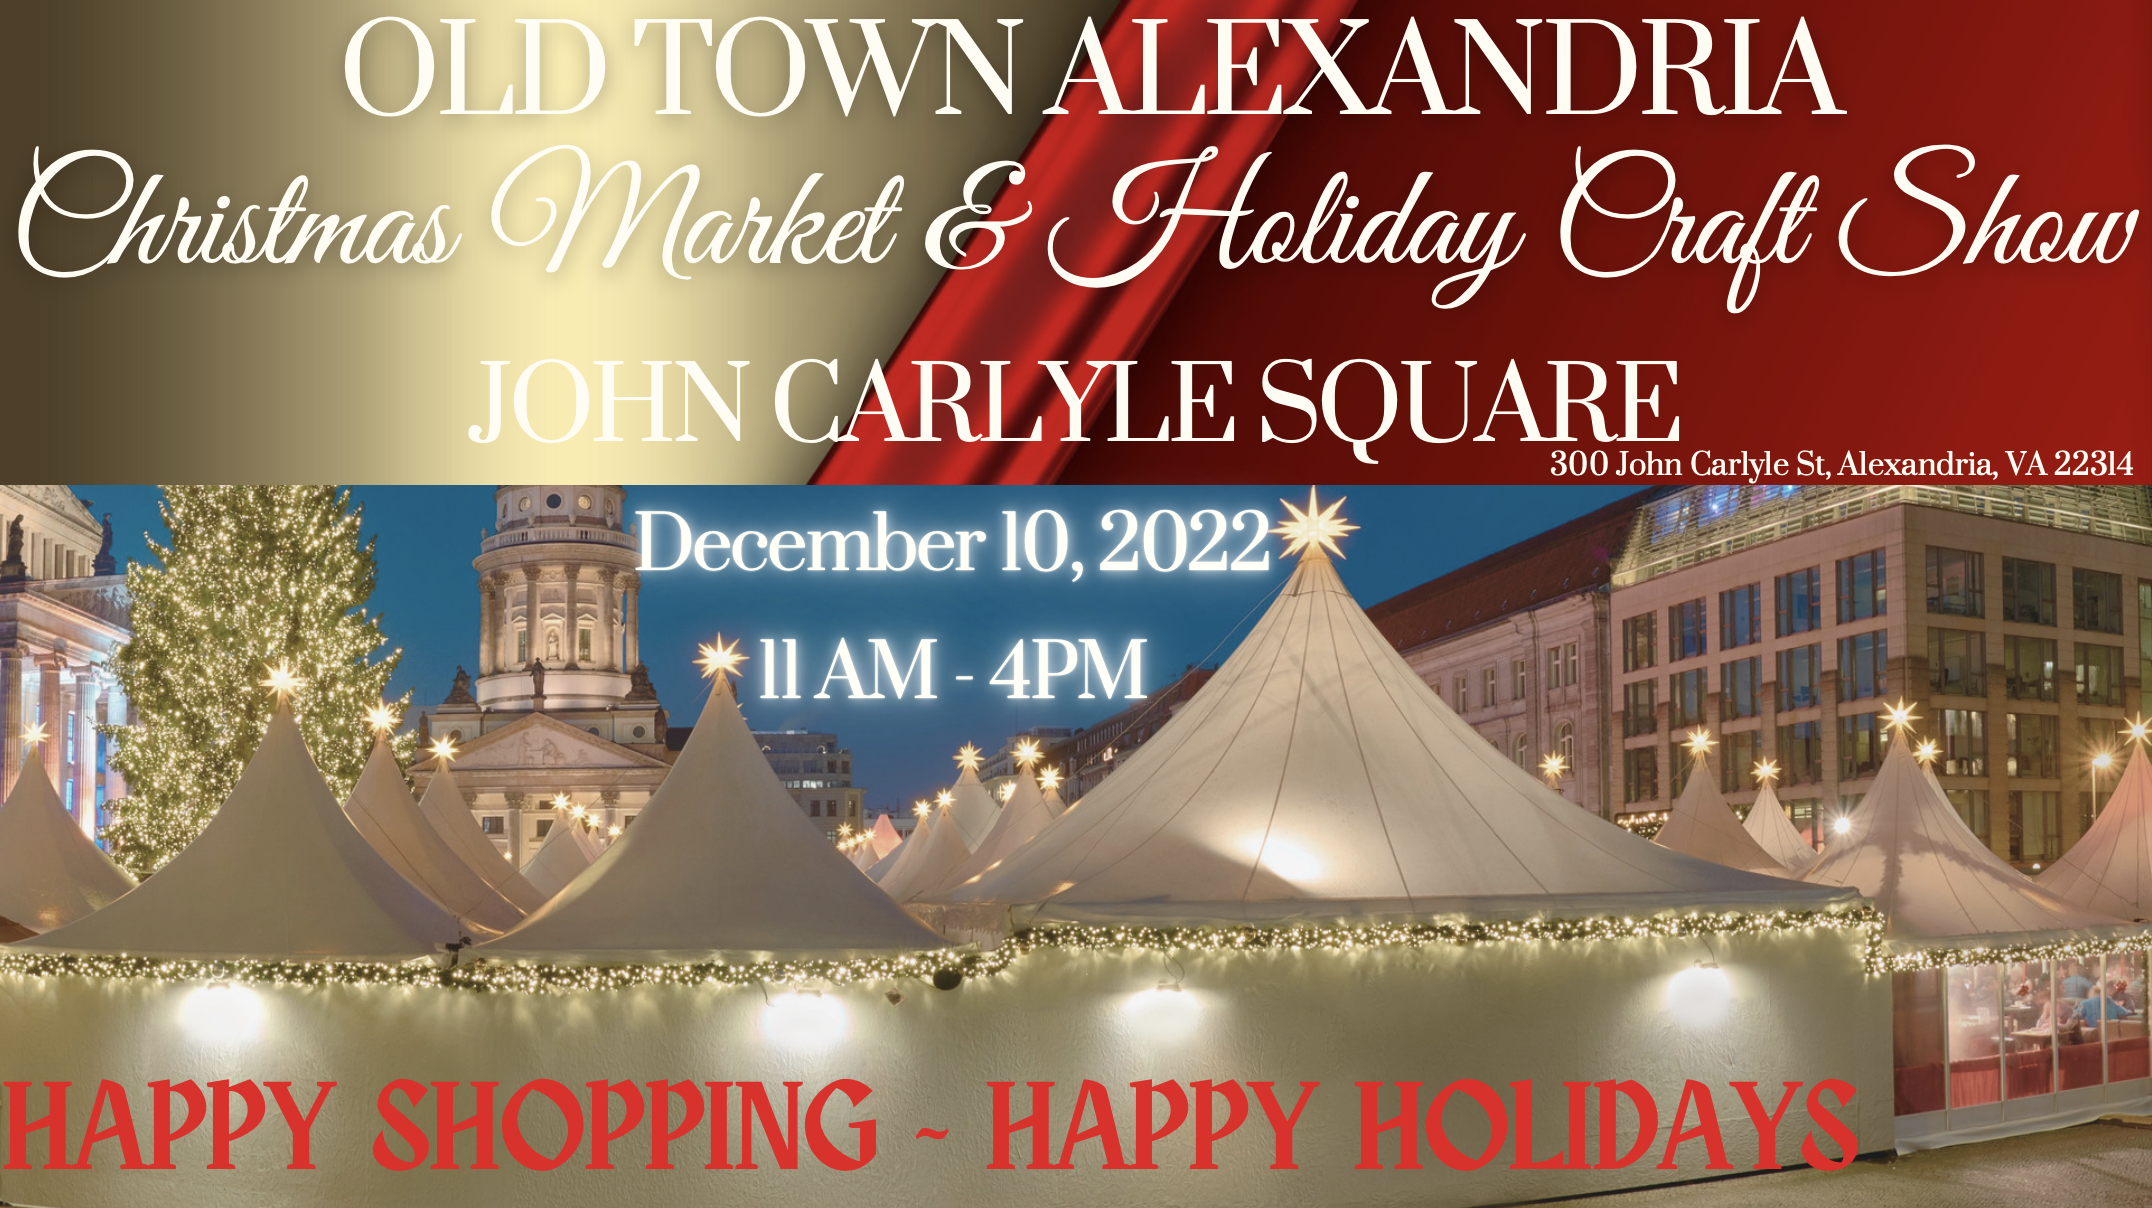 Old Town Alexandria Christmas Fair and Holiday Craft Show